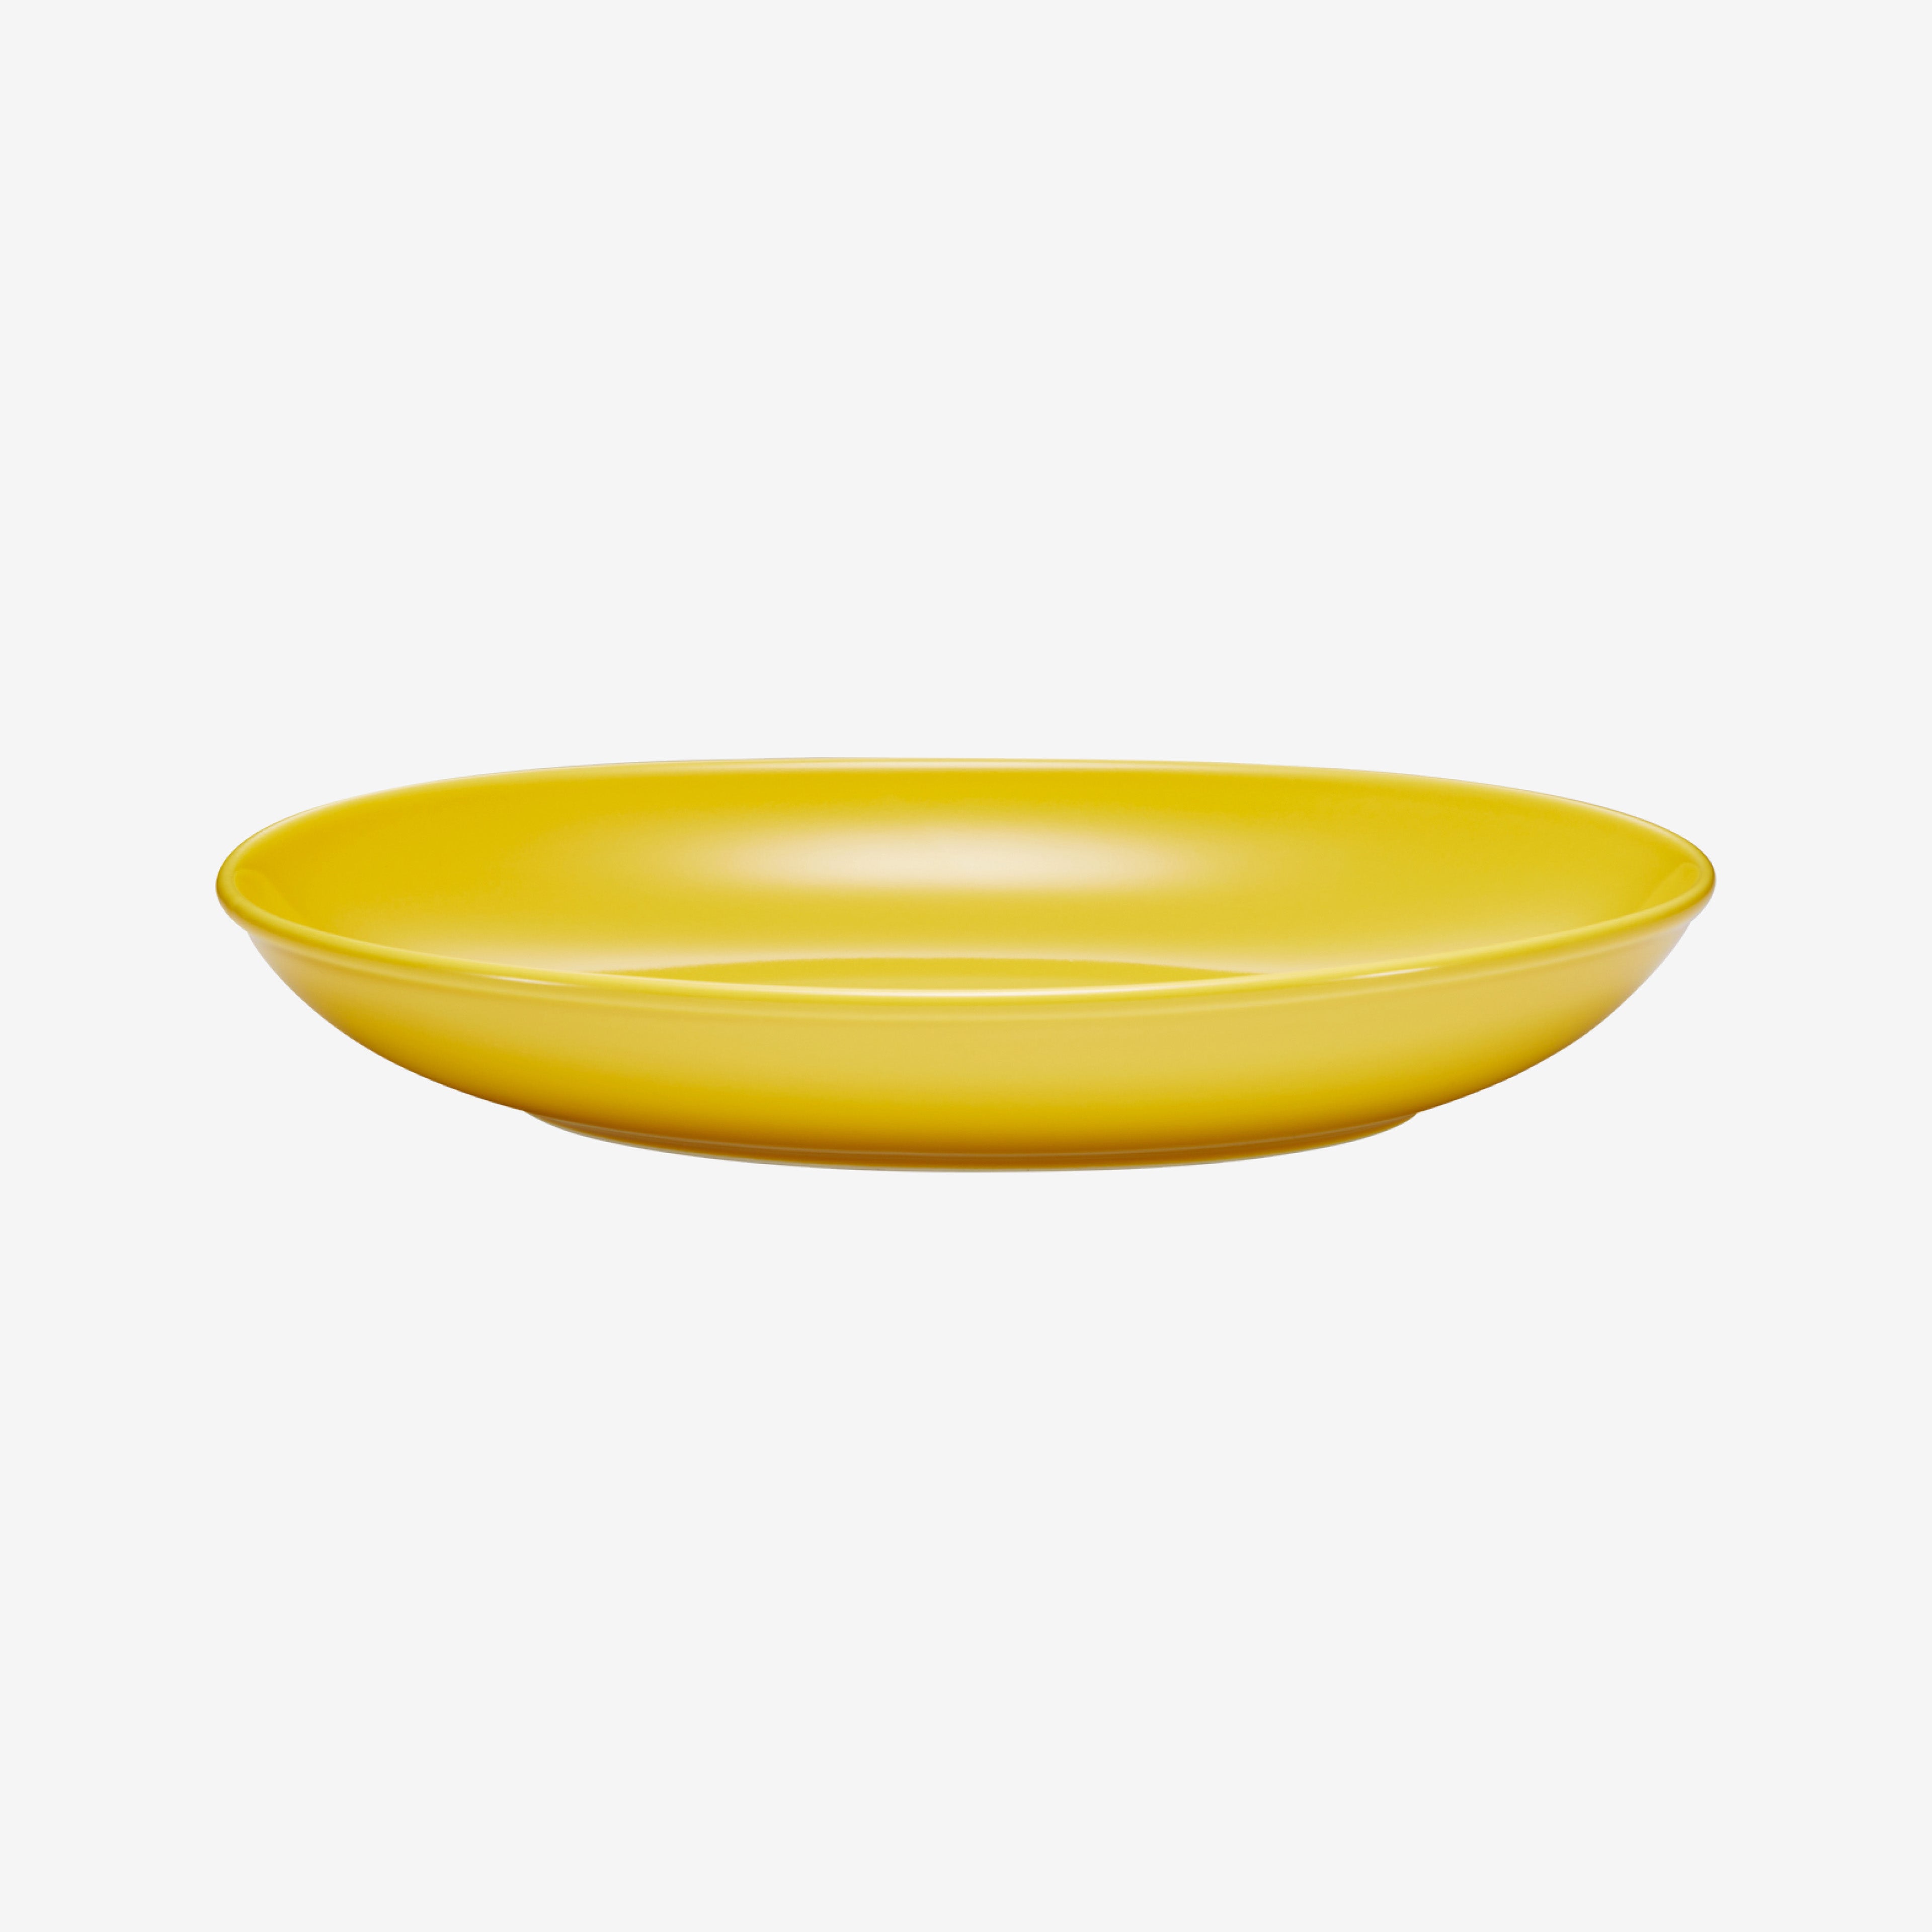 Oval Bowl 270 mm